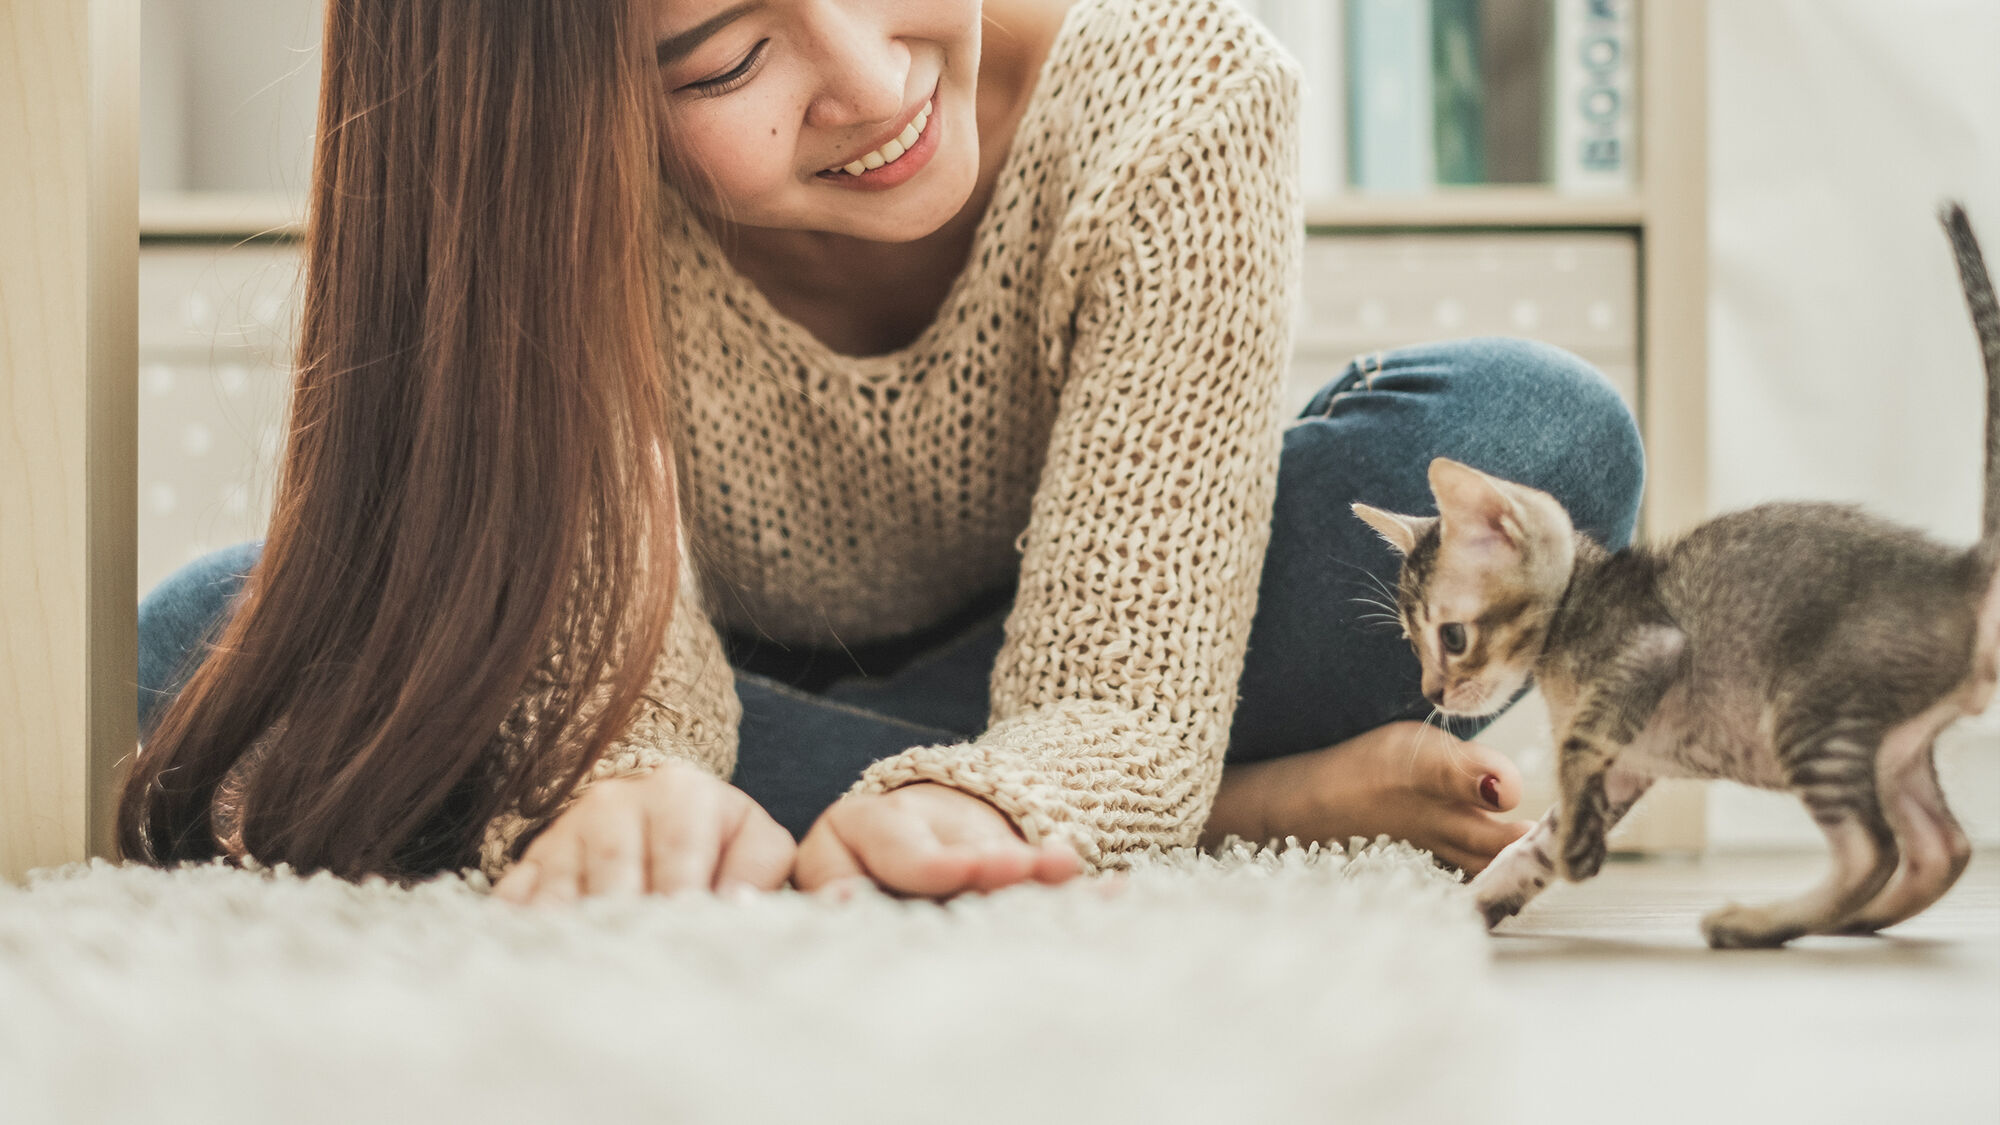 A young kitten playing indoors with a woman on a white rug